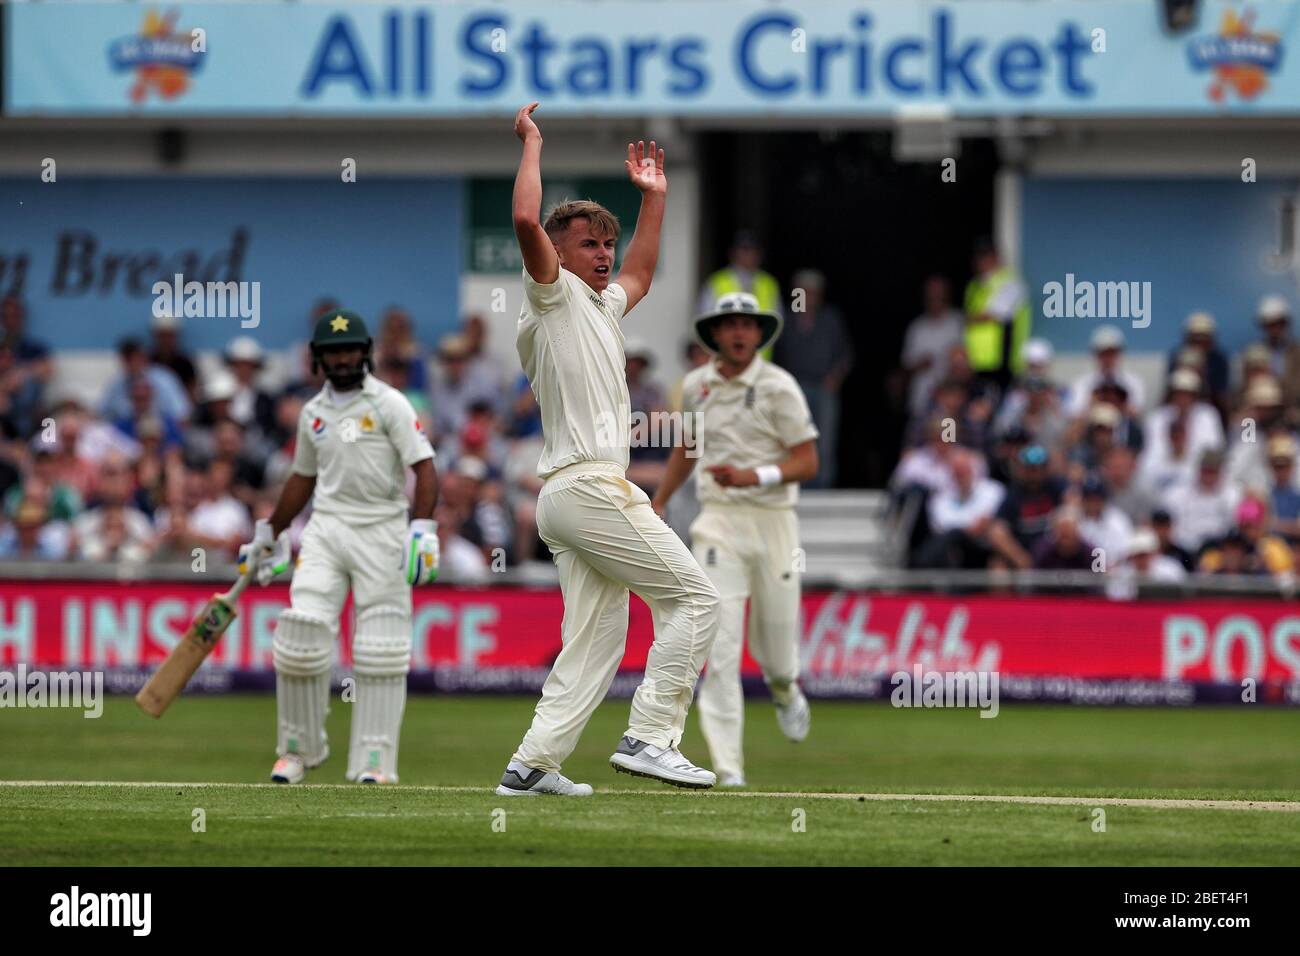 LEEDS, UK - JUNE 1ST Sam Curran of England appeals for an LBW decision during the first day of the Second Nat West Test match between England and Pakistan at Headingley Cricket Ground, Leeds on Friday 1st June 2018. (Credit: Mark Fletcher | MI News) Stock Photo